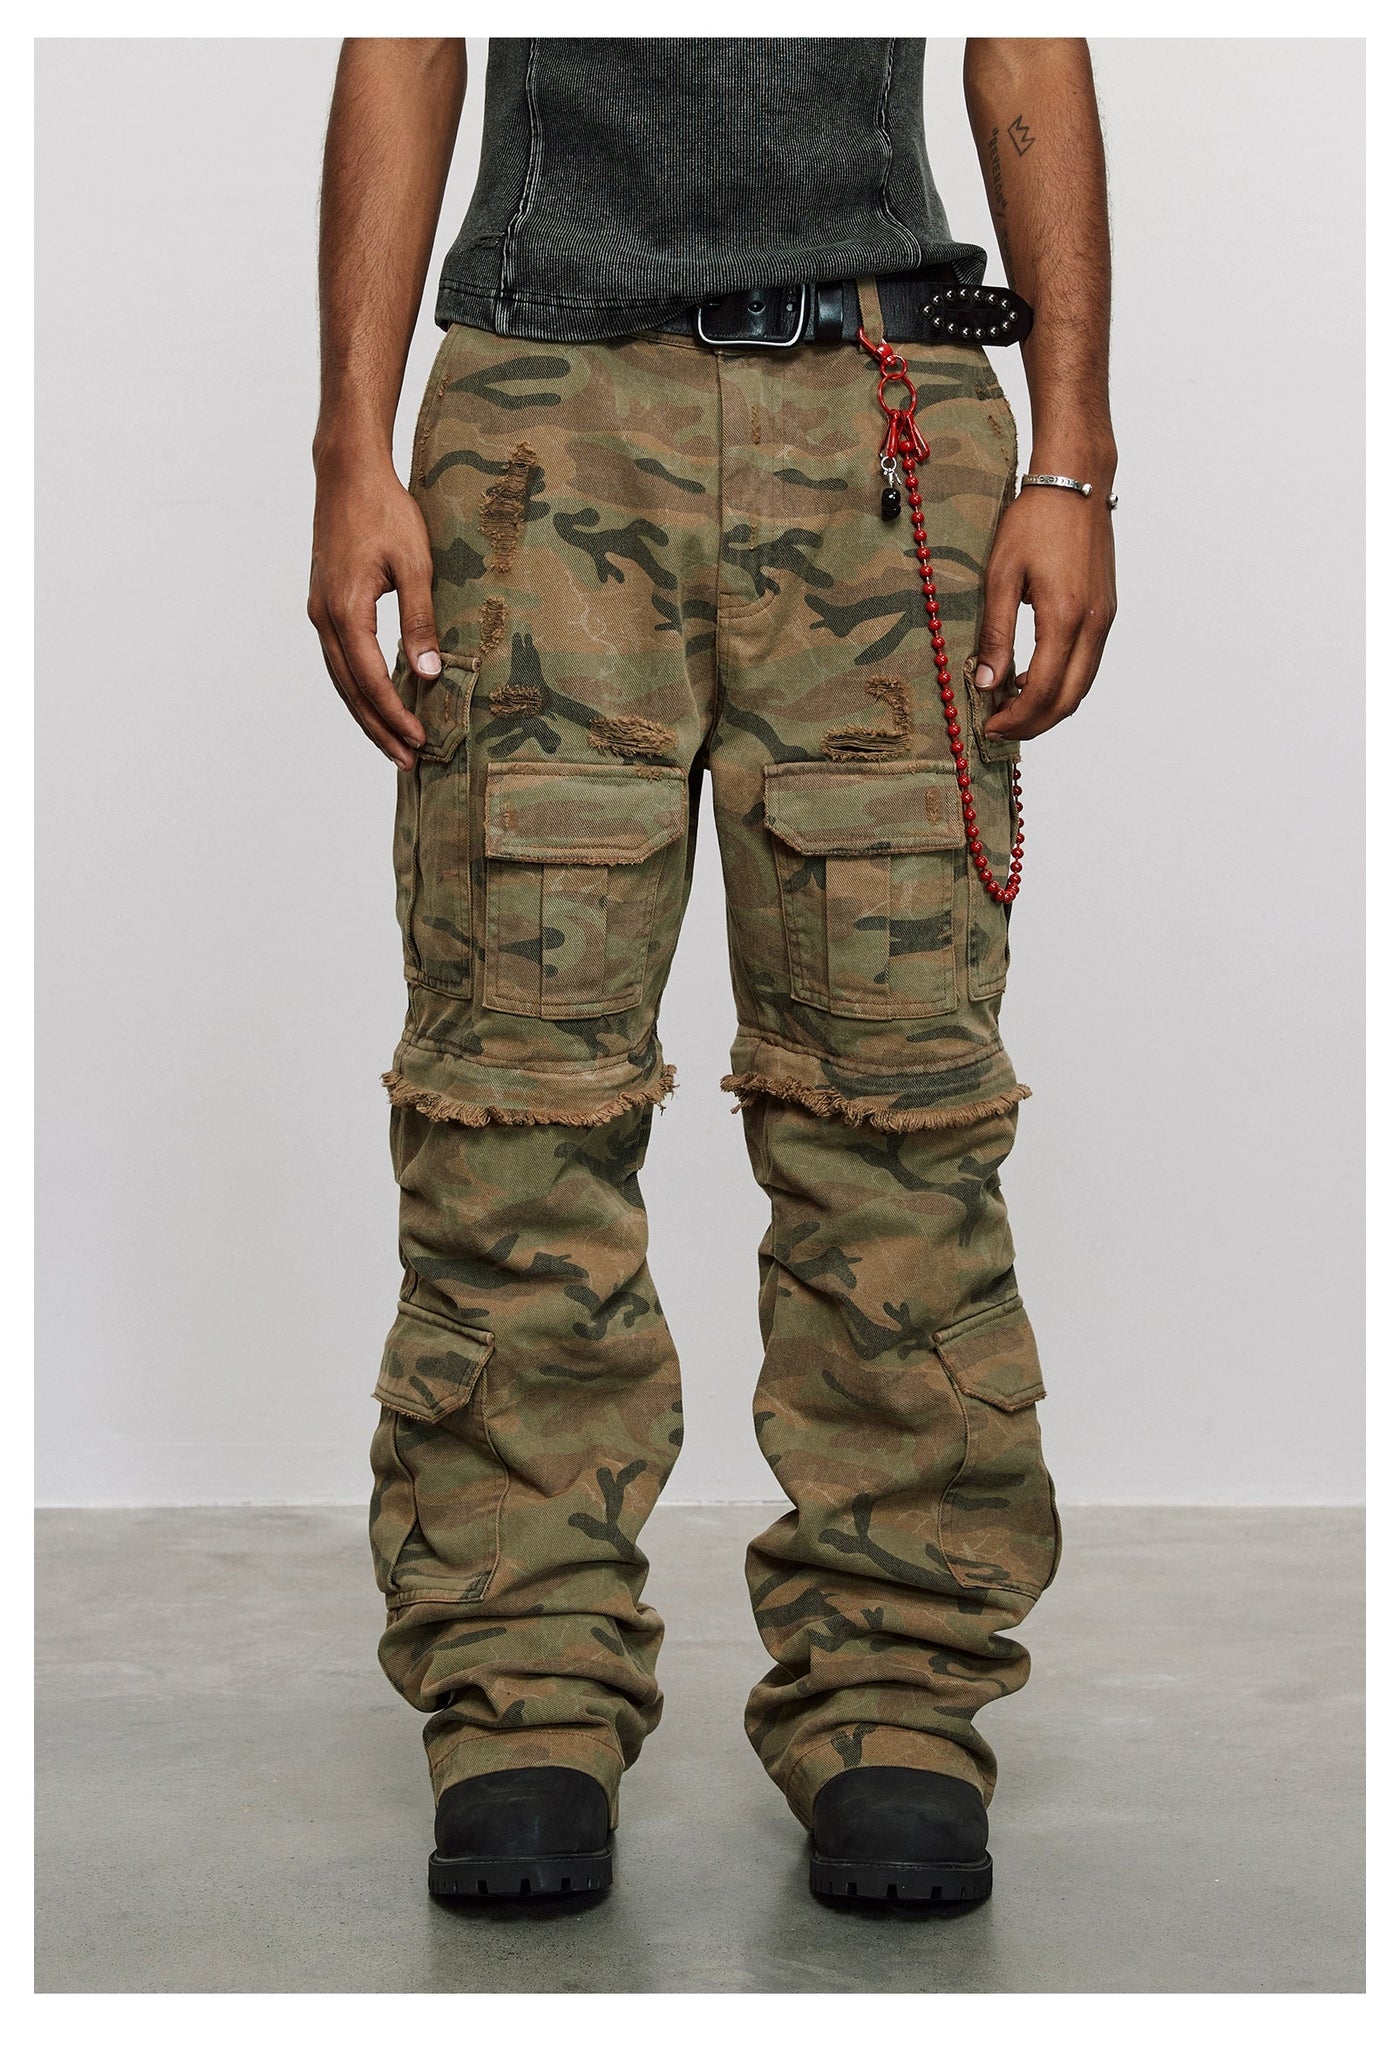 Mid Frayed Camouflage Pants Korean Street Fashion Pants By ANTIDOTE Shop Online at OH Vault